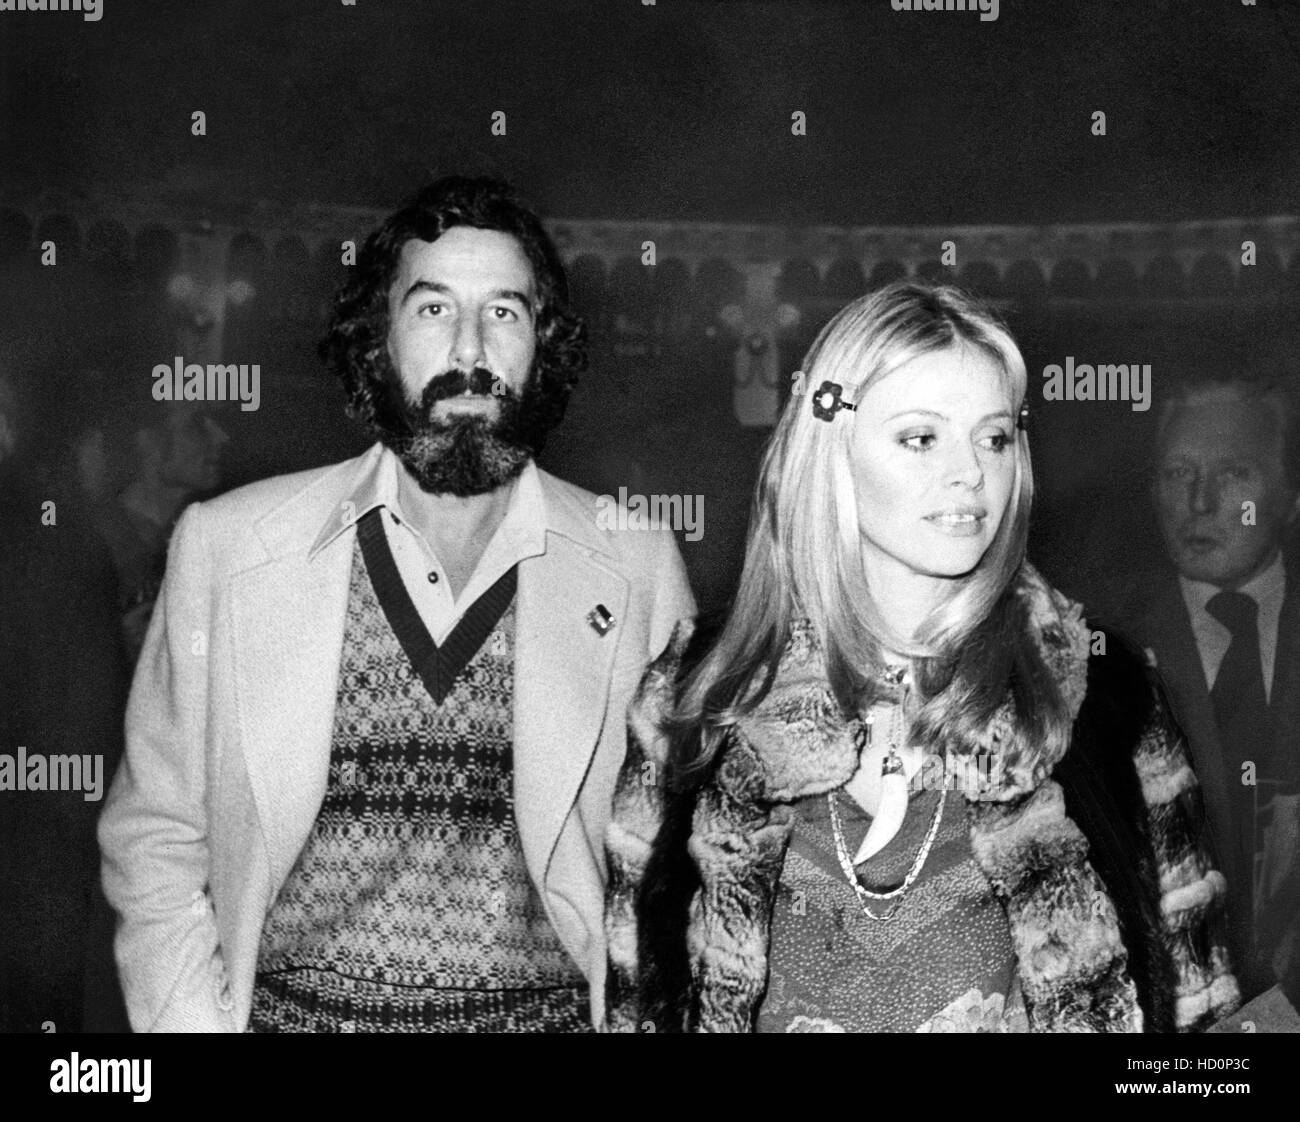 From left: Lou Adler, Britt Ekland arriving at London theater to see ...